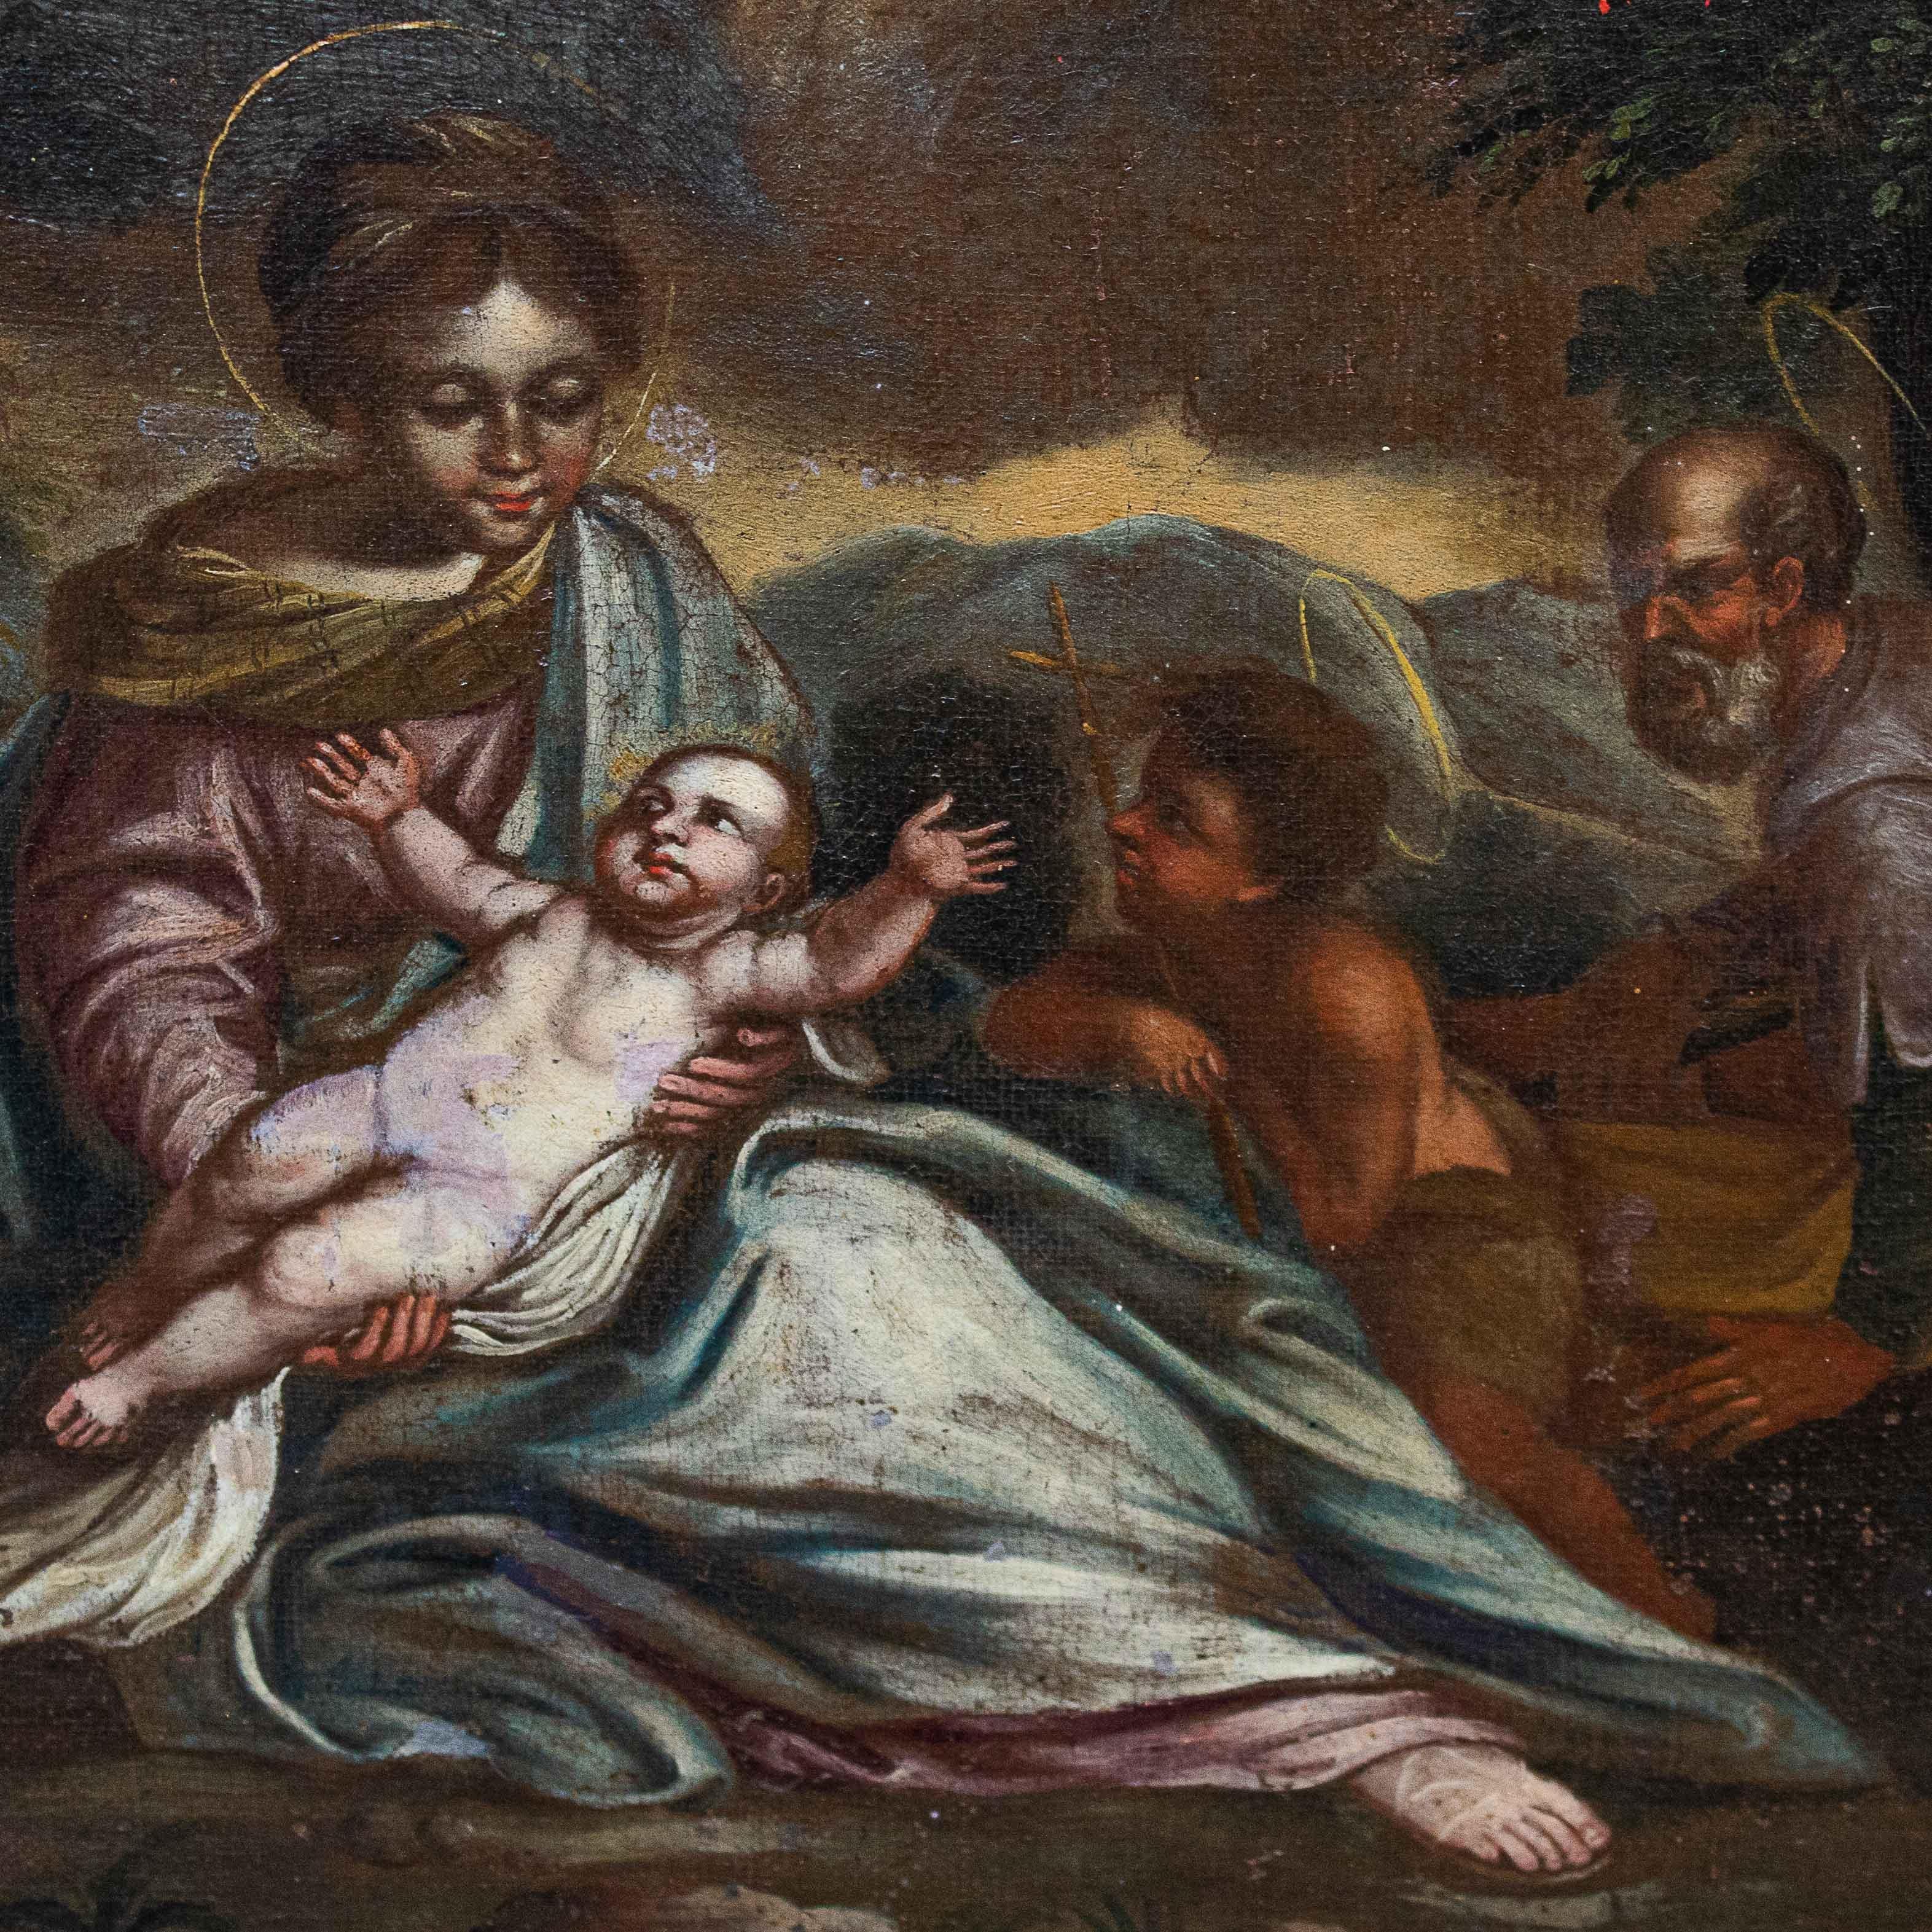 Simone Cantarini (Pesaro, 1612 - Verona, 1648), circle of
Rest on the flight to Egypt
Oil on canvas, 46.5 x 37.5 cm
Frame 61.5 x 53.5 x 5 cm

The work in question, given the comparisons with the works of the master, is to be referred to a